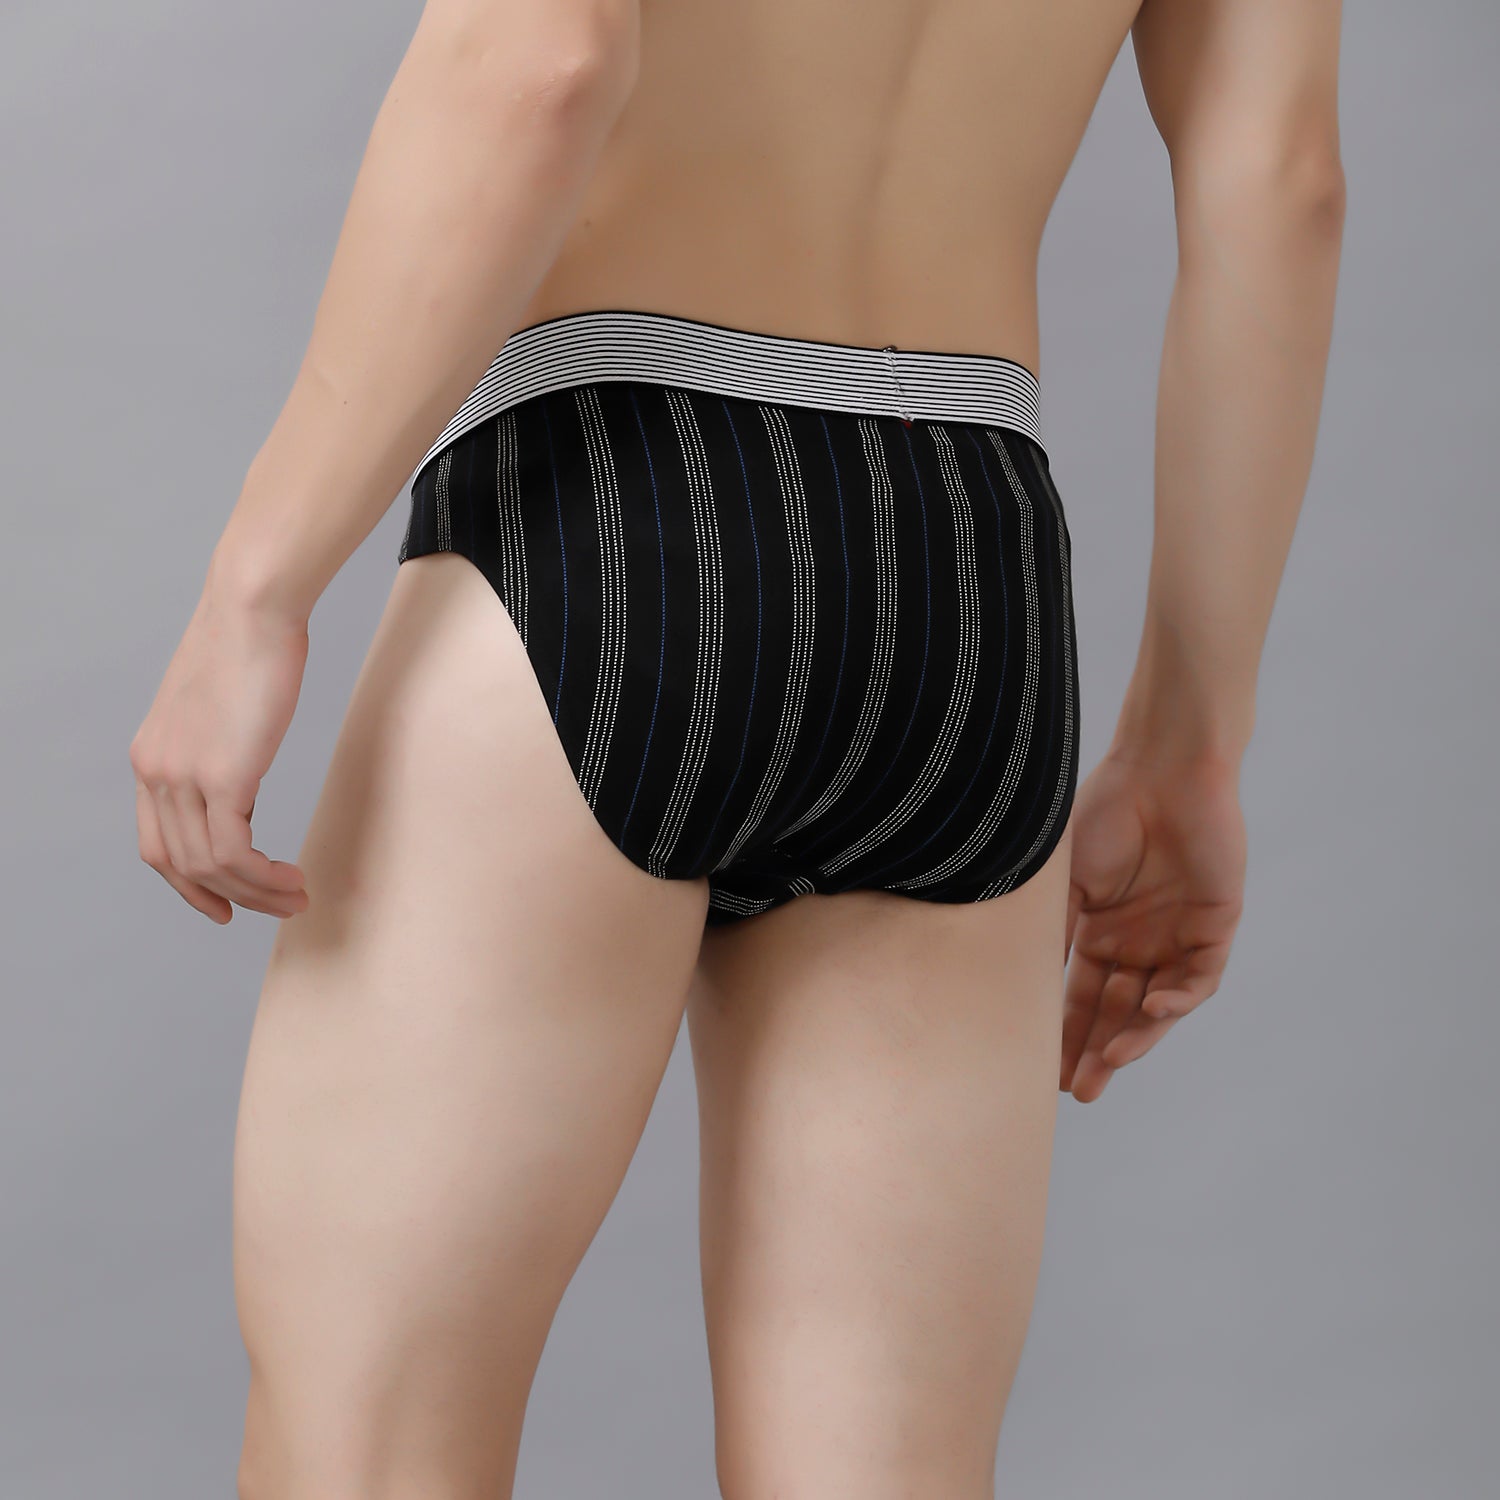 CP BRO Men's Printed Briefs with Exposed Waistband - Black White Stripe Print